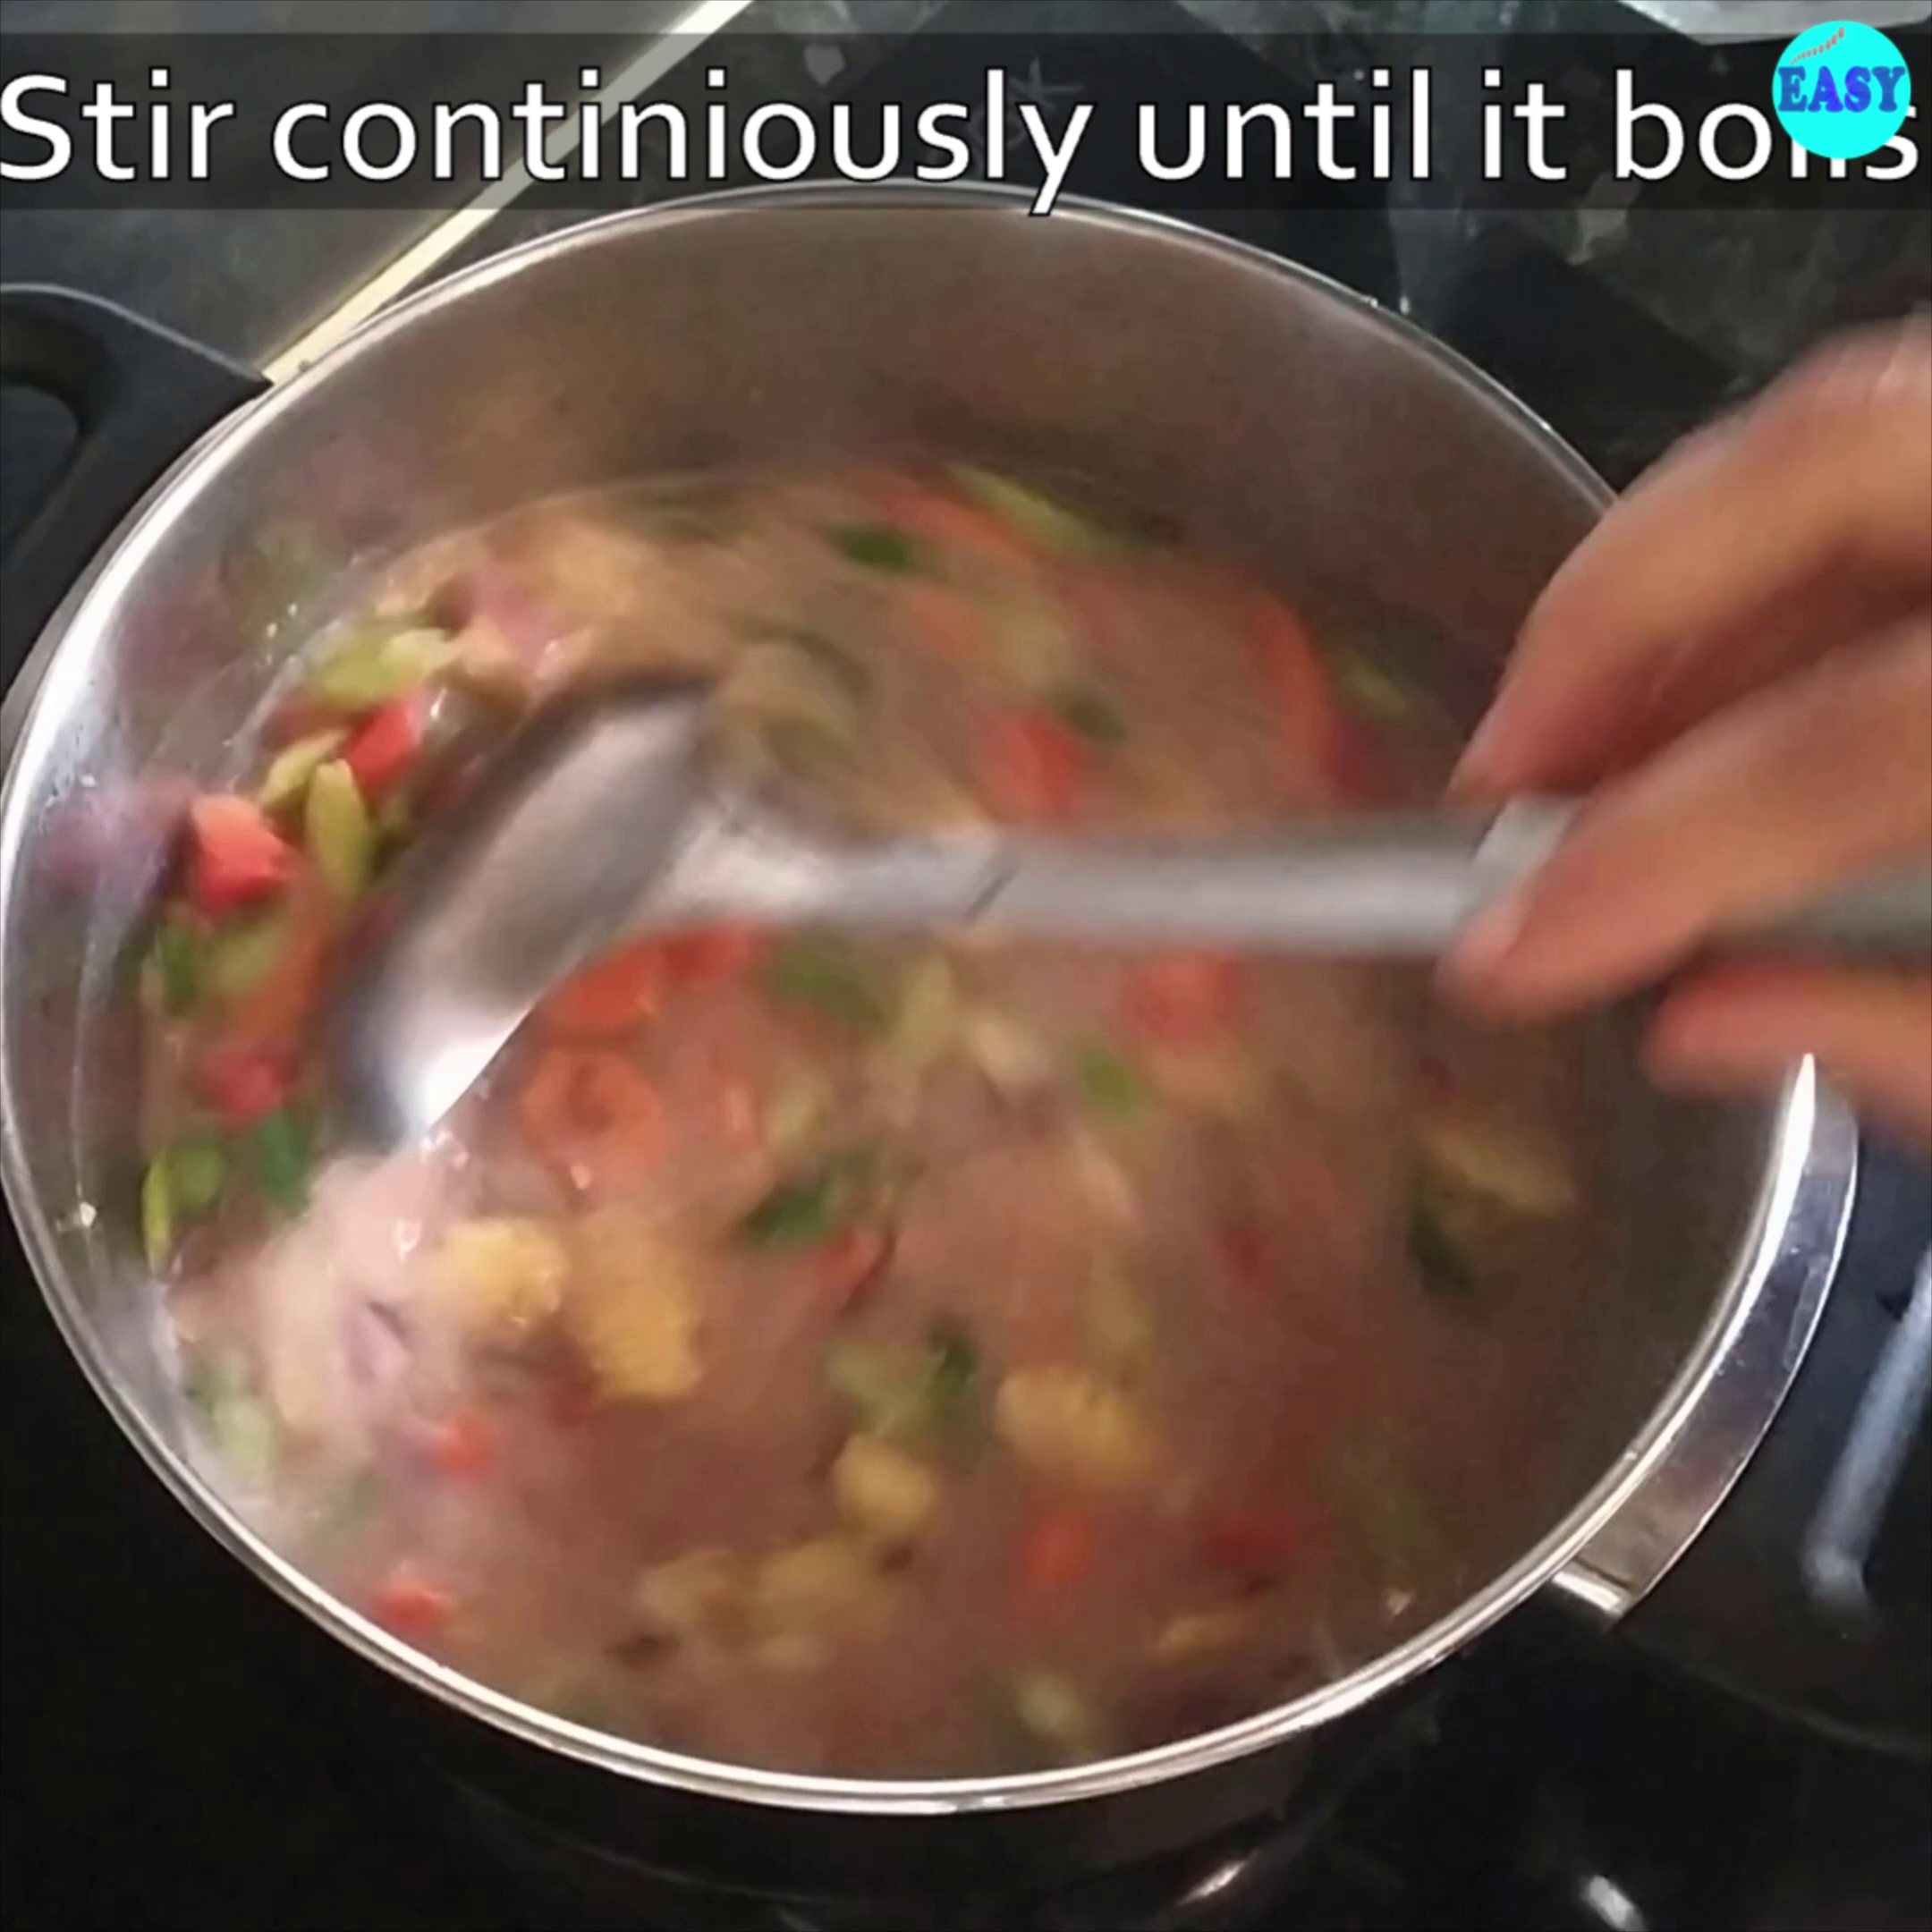 Step 8 - Keep stirring and allow the mixture to come to boil. Let it cook until it becomes shiny and little darker in color or until you get the desired consistency this might take around 8 to 10 minutes.